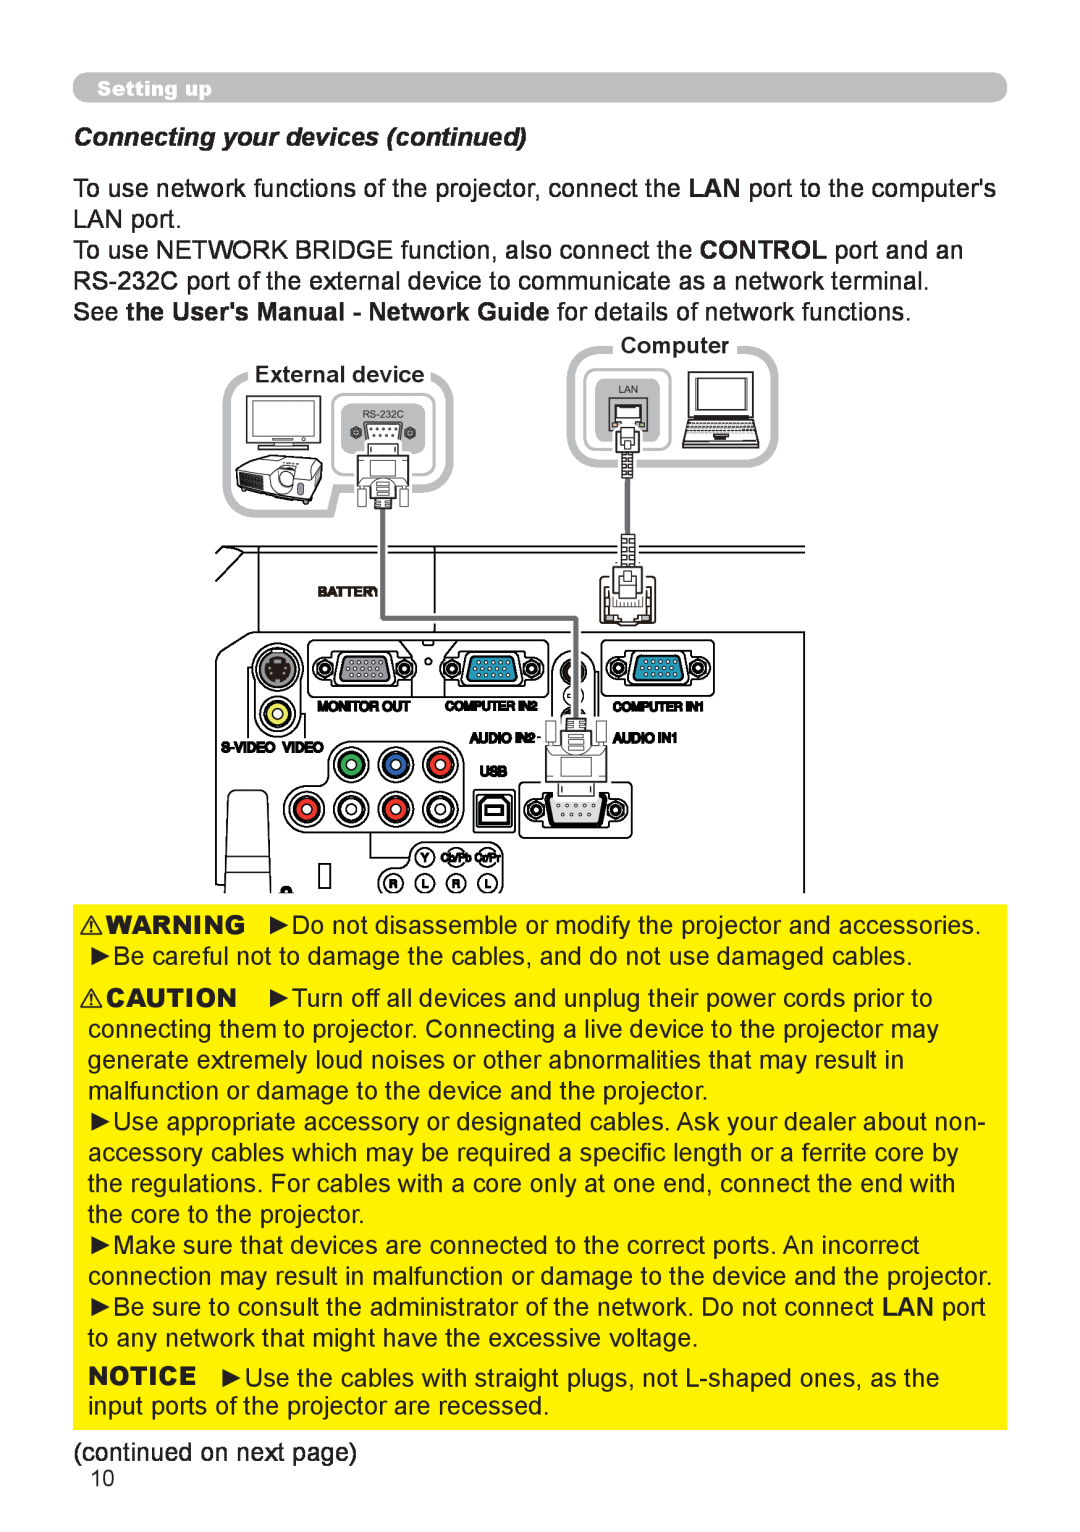 Dukane 8919H-RJ, 8920H-RJ, 8755J-RJ user manual Connecting your devices continued, Ba Ttery 